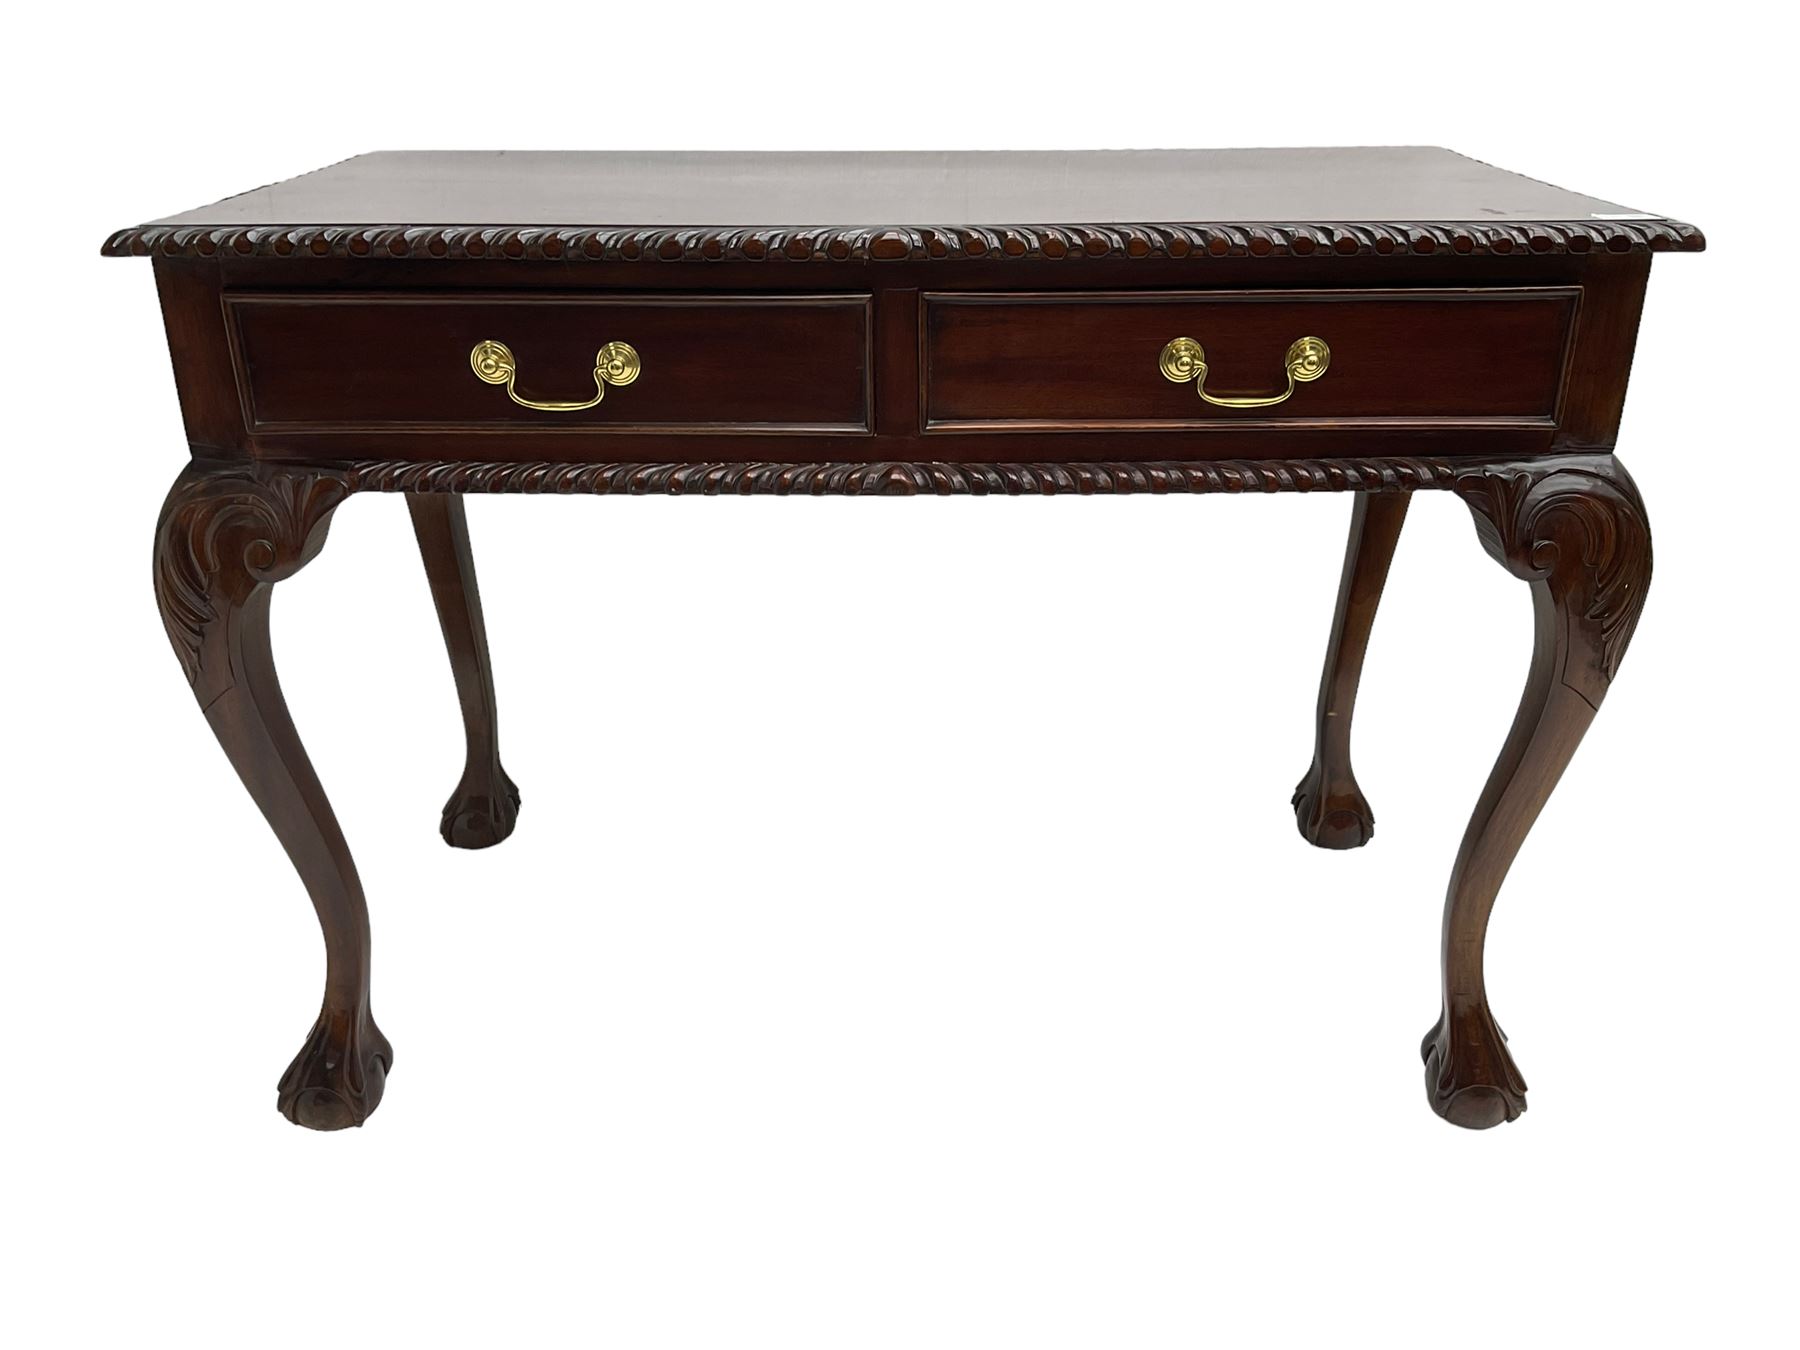 Georgian Chippendale design mahogany side table - Image 6 of 8